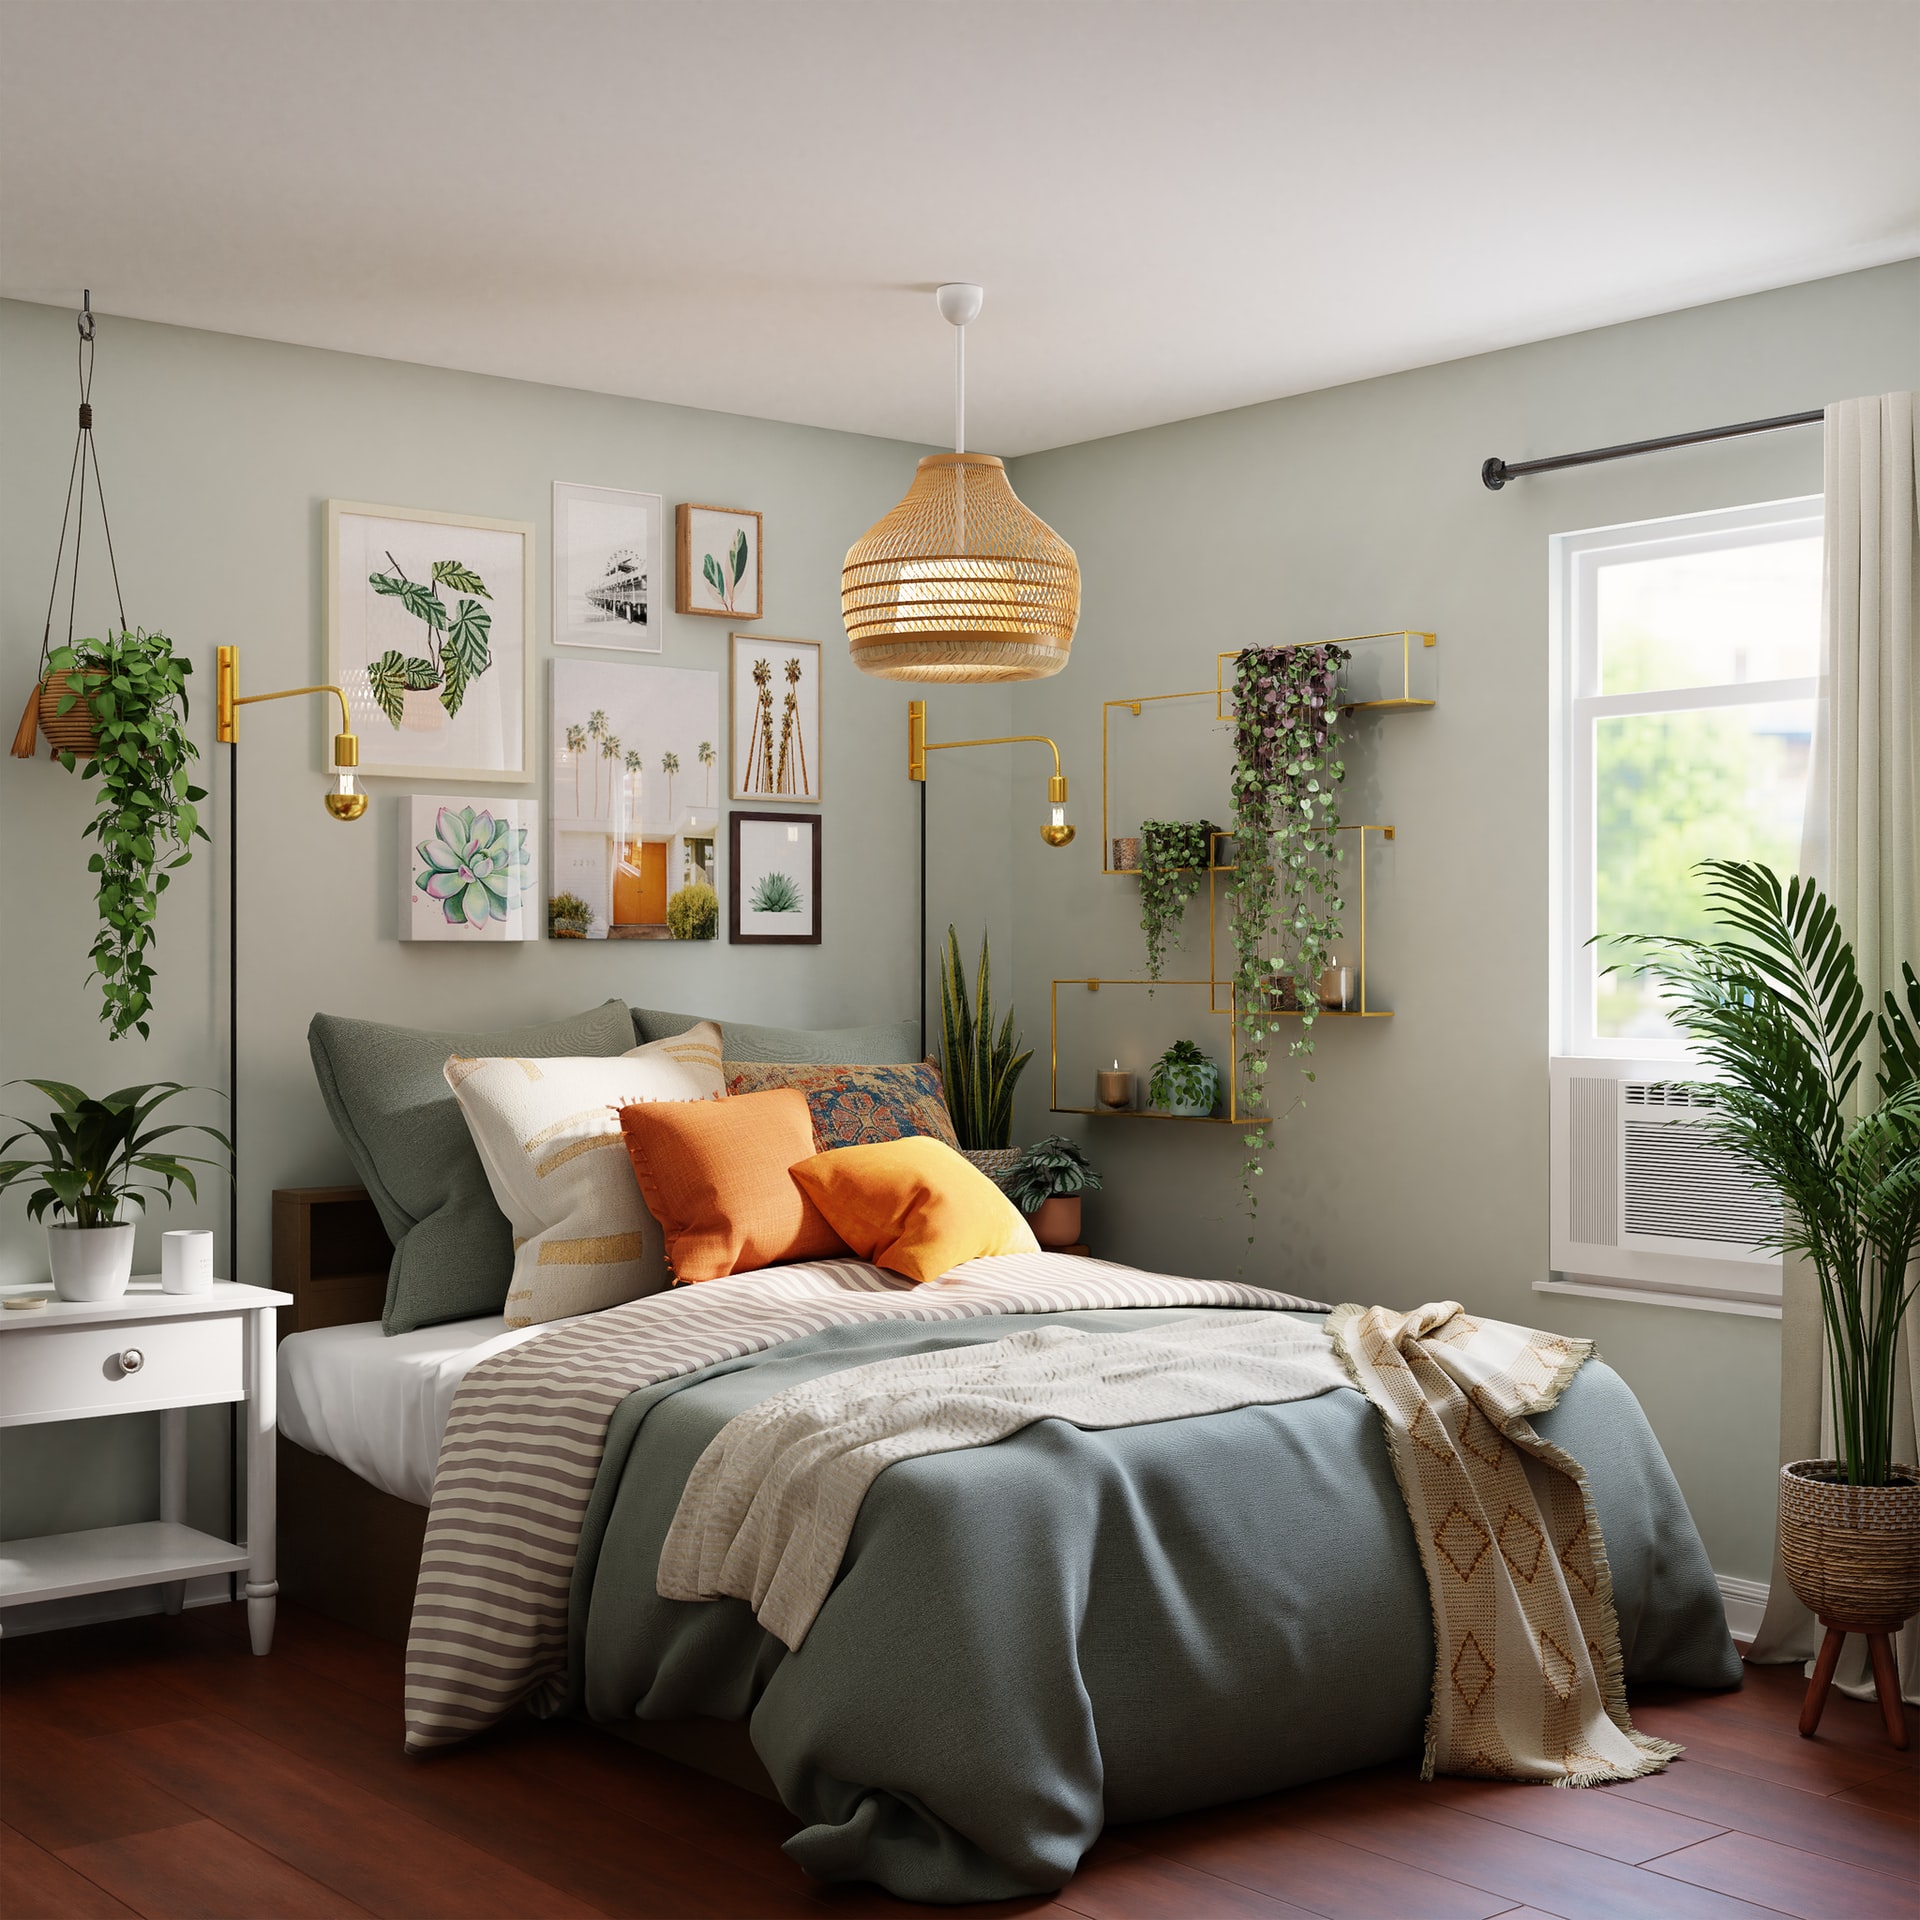 Houseplant will add life and freshness to your guest room.